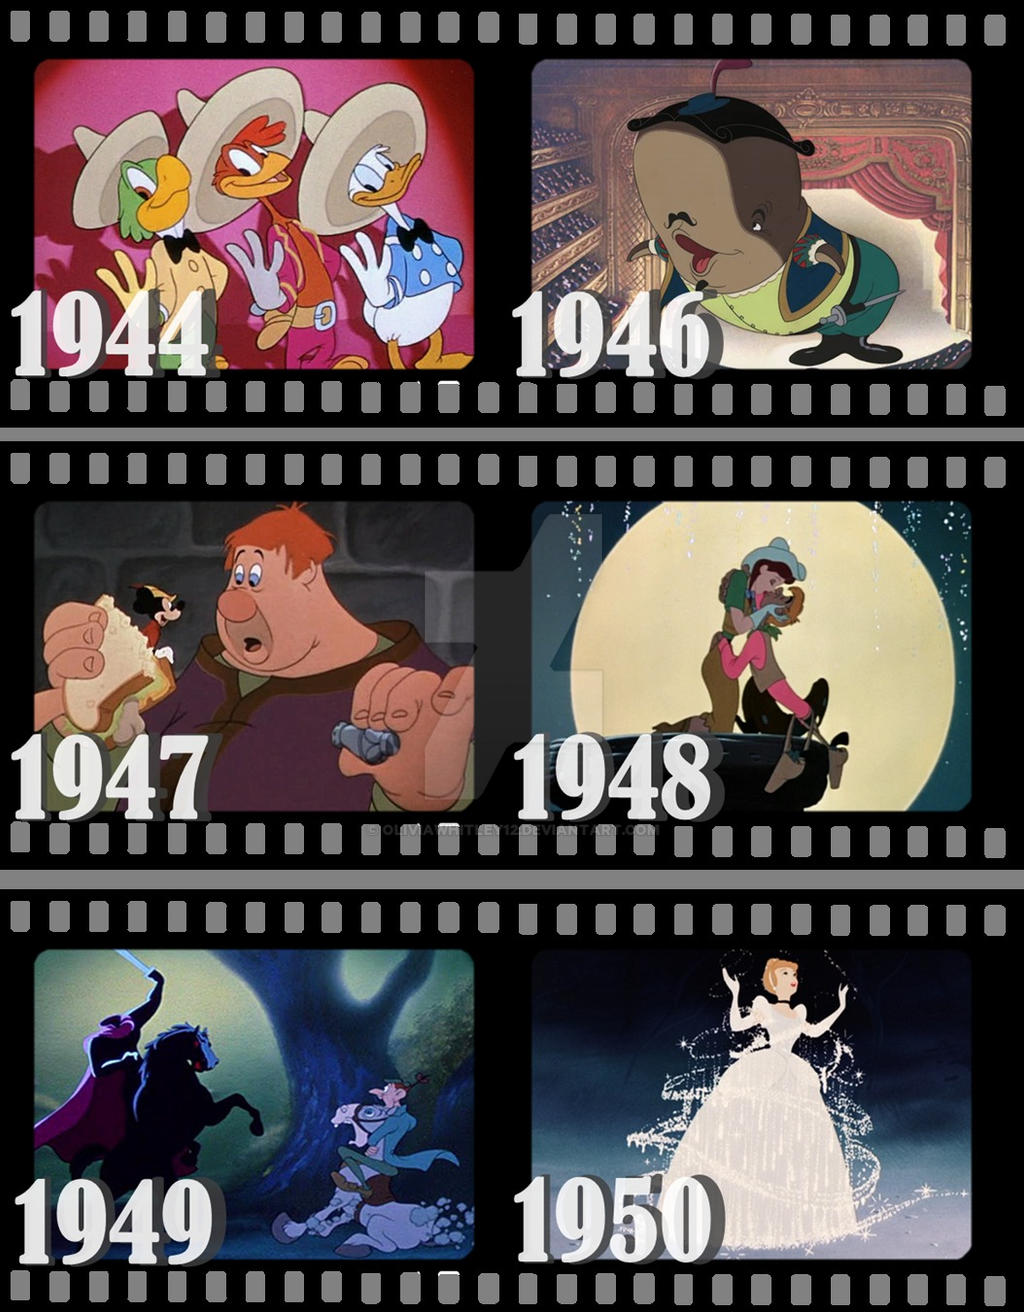 Disney Animated Movies 1944-1950 by OliviaWhitley12 on DeviantArt